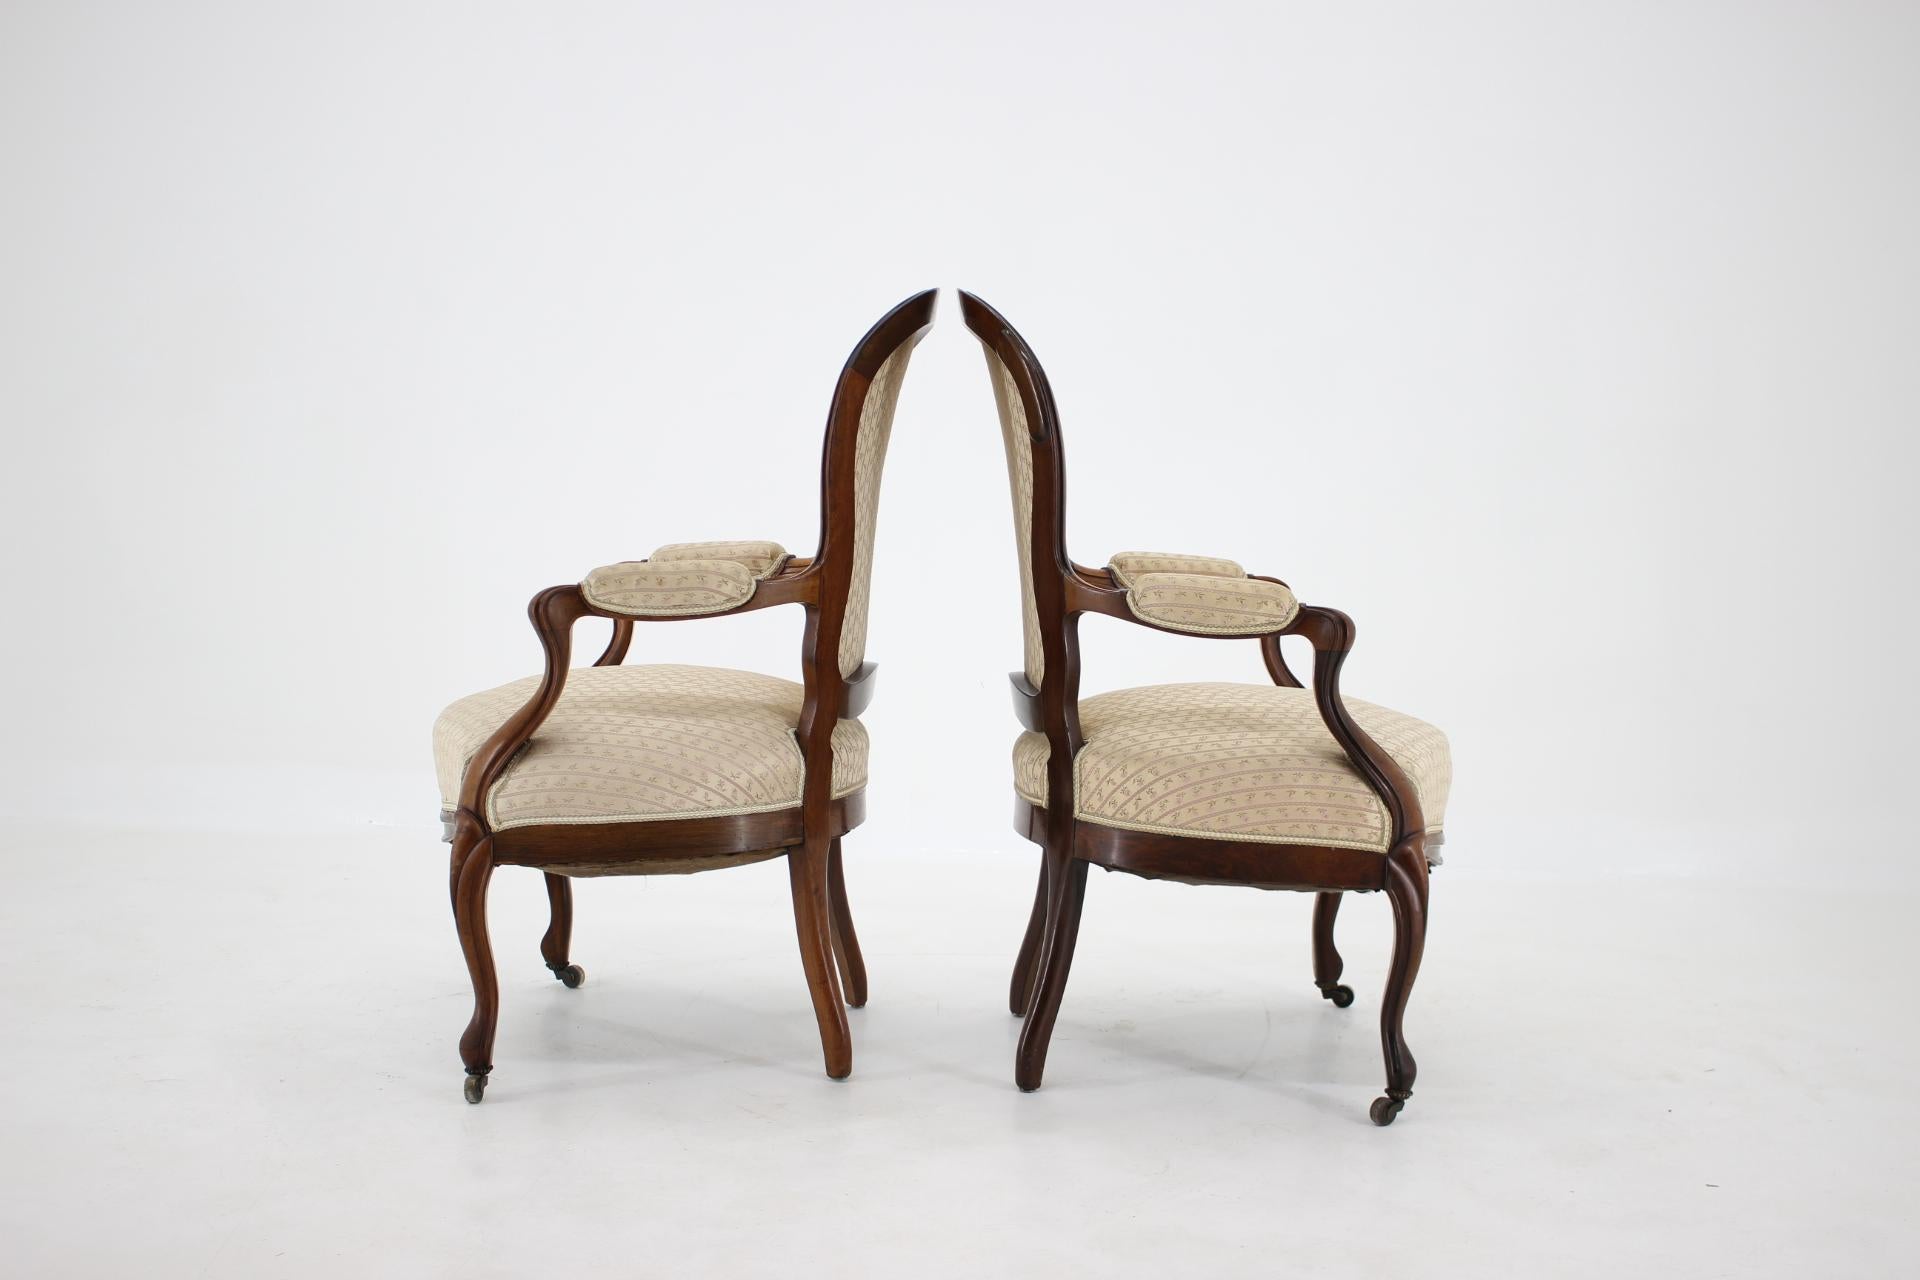 Upholstery 1900s Pair of Original Danish Rococo Chairs For Sale